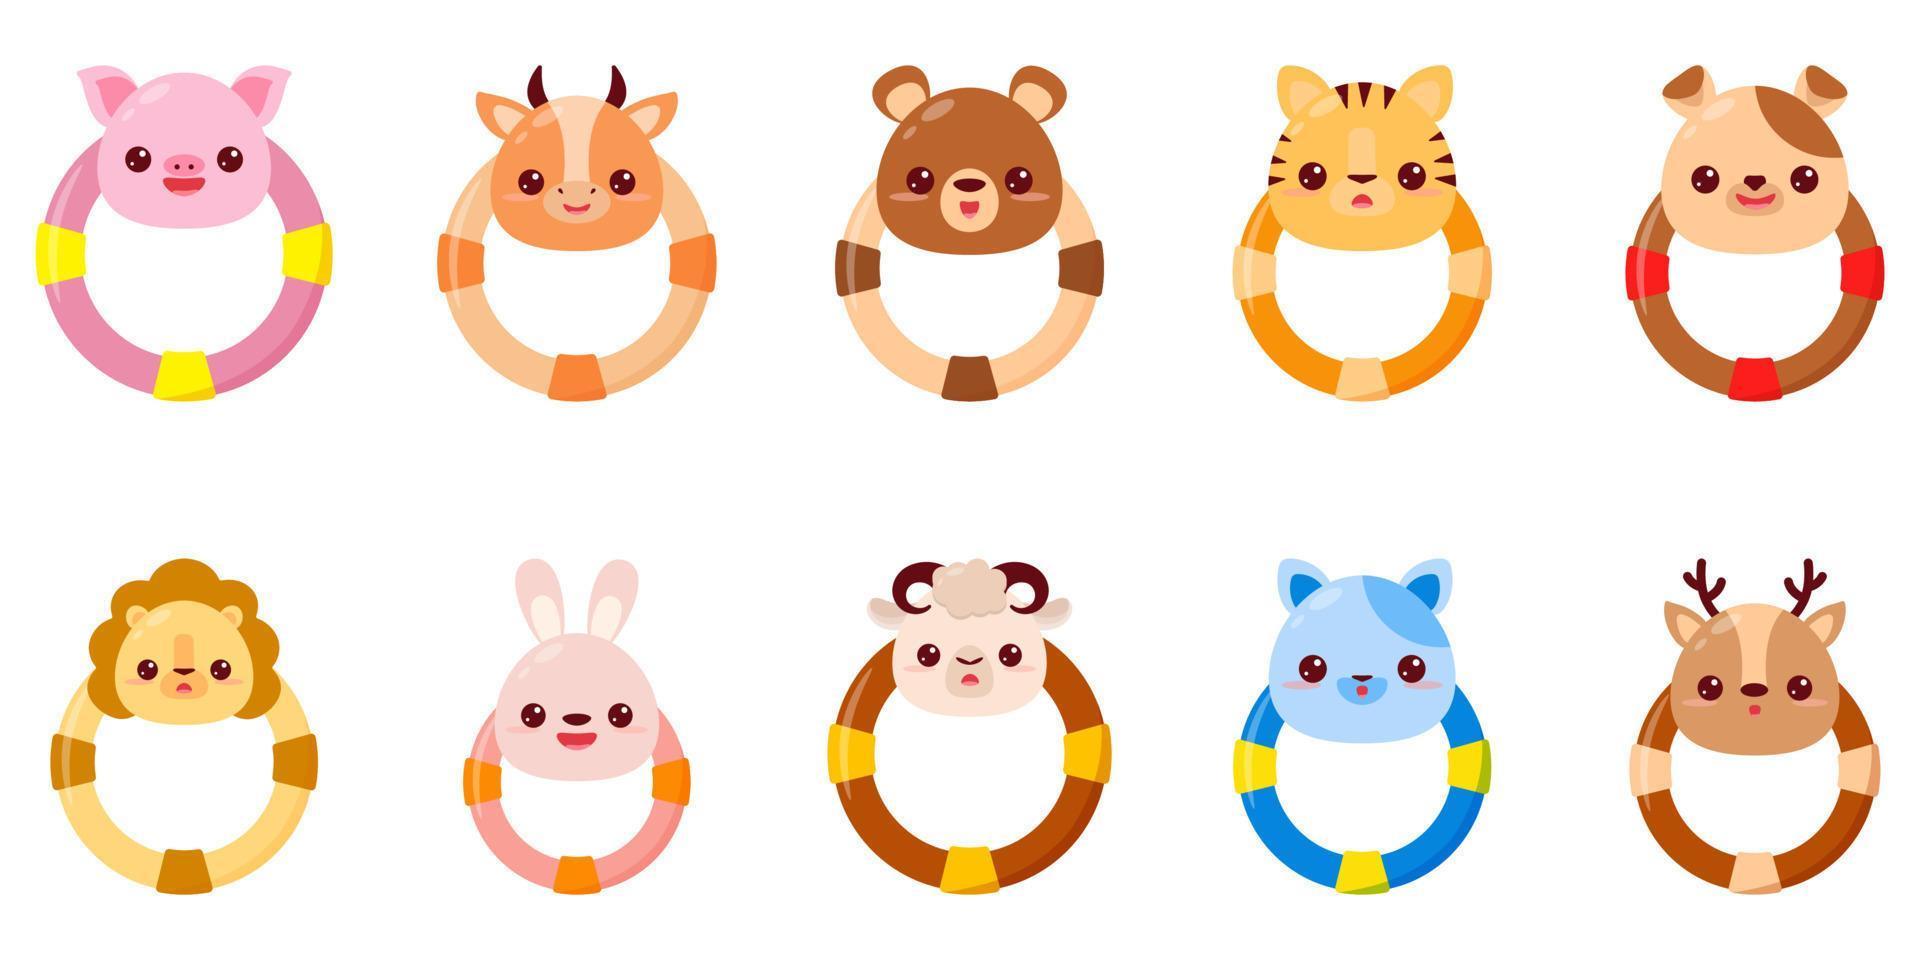 A baby rattle with a ring. A rattle with a cartoon animals for kids. A gift for newborns. set vector